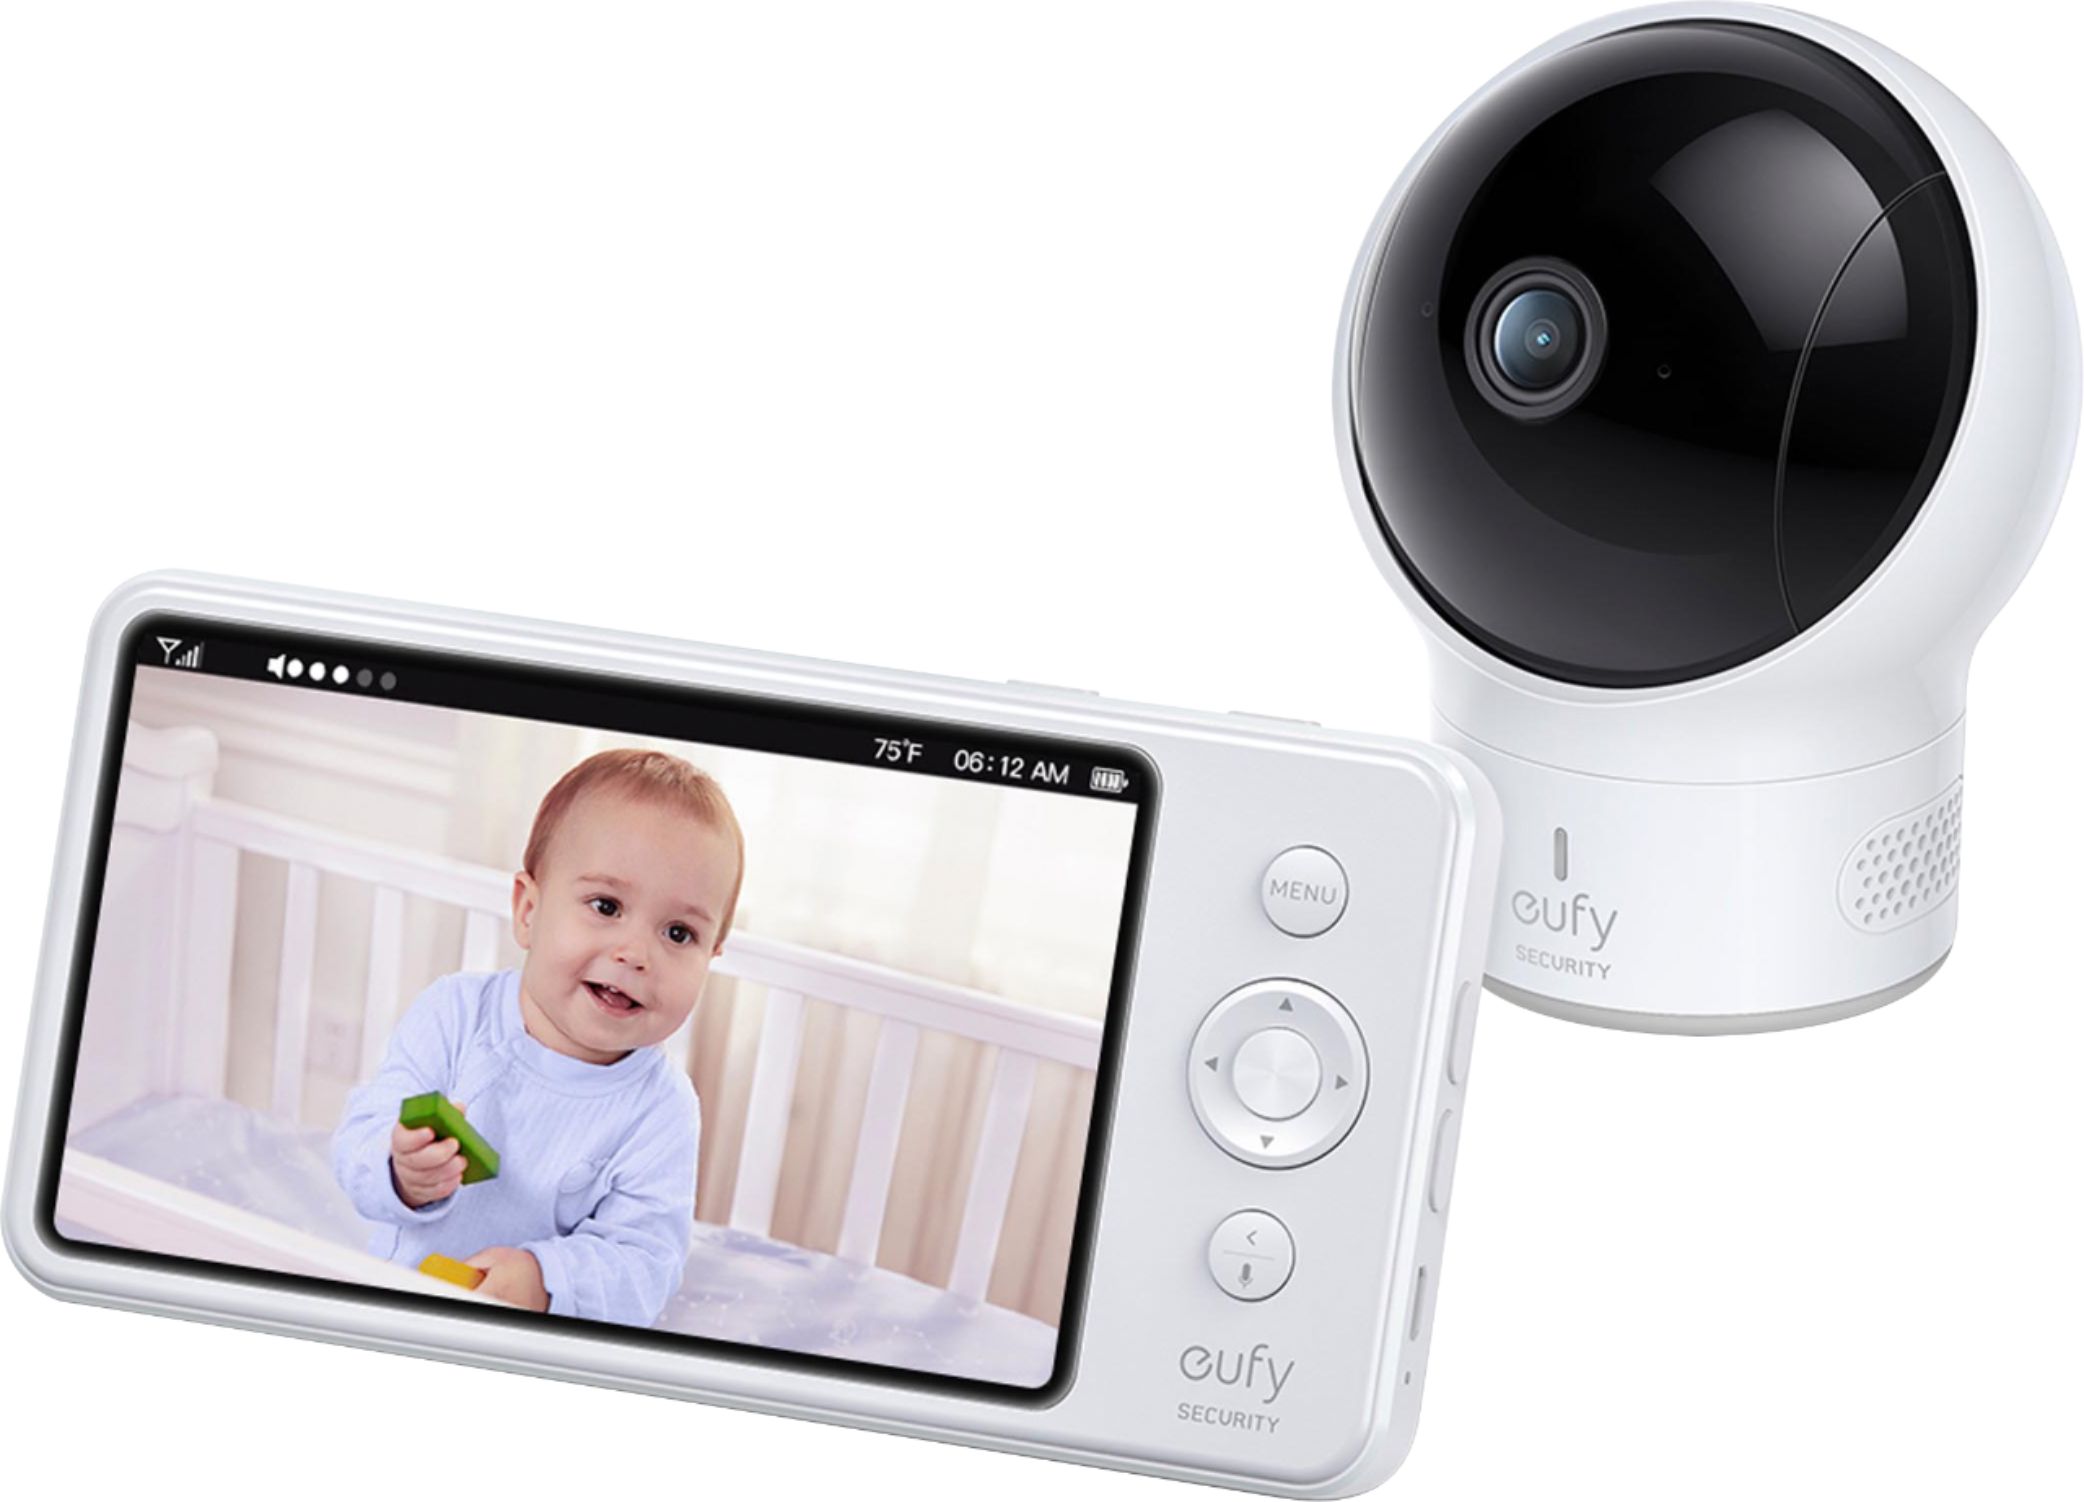 Fjerde Adelaide Uforglemmelig eufy Security Spaceview Baby Monitor Cam Bundle E83121D1 - Best Buy